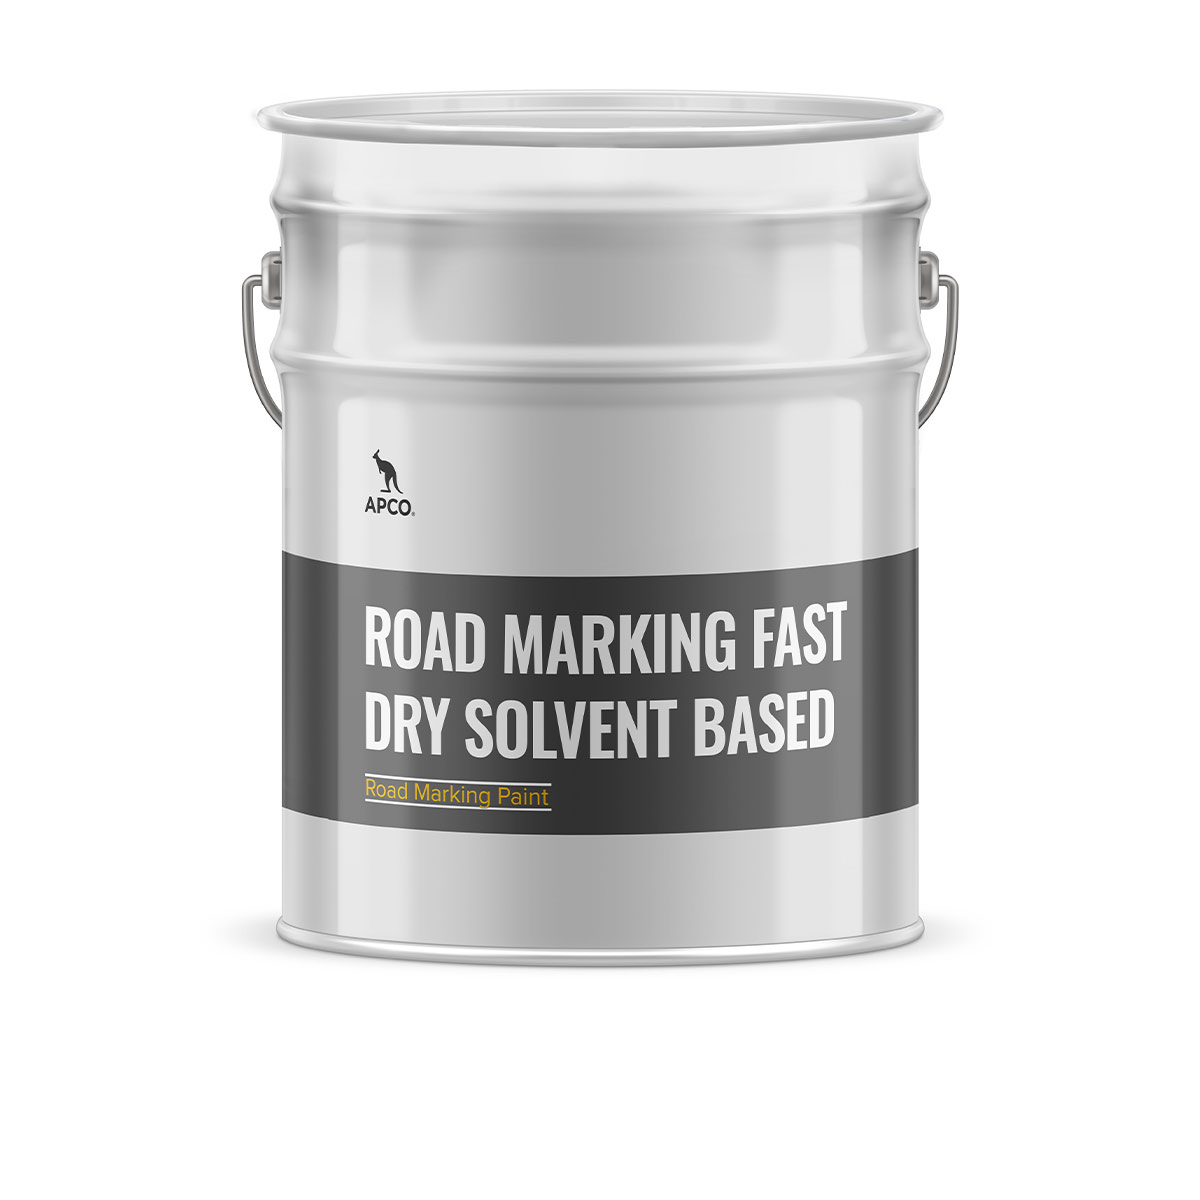 Road Marking Fast Dry Solvent Based